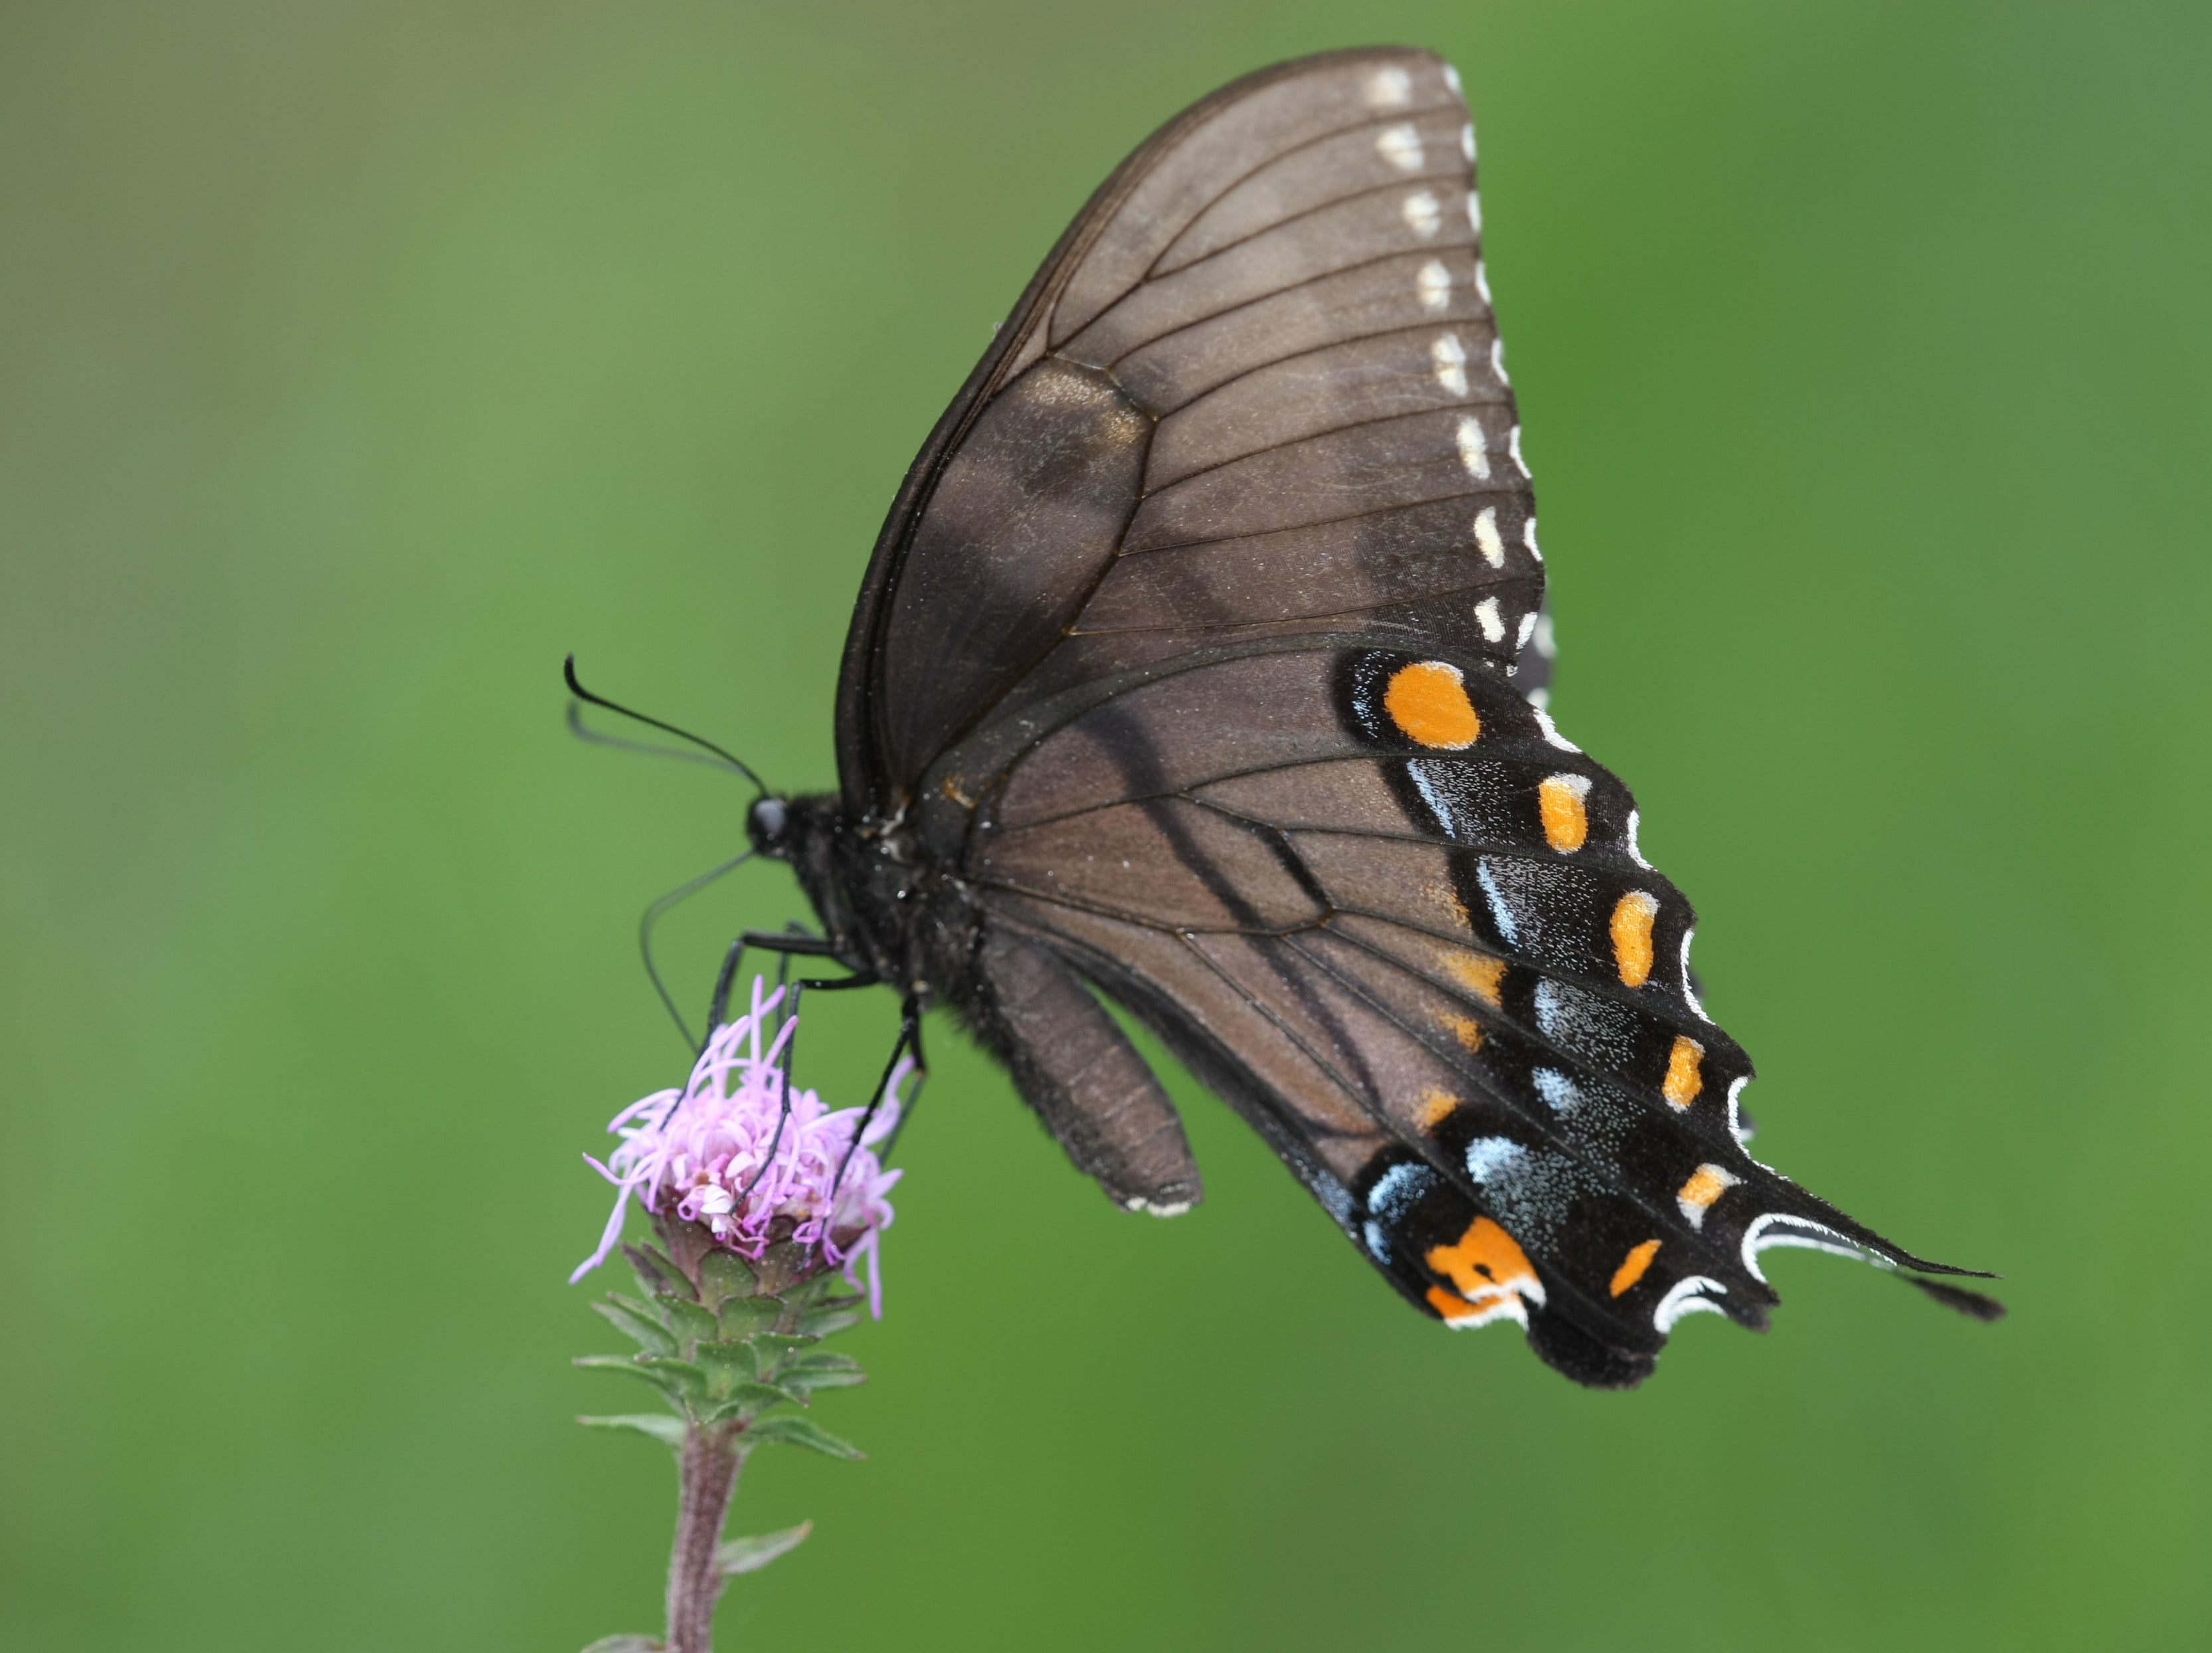 Spicebush swallowtail butterfly perched on pink flower